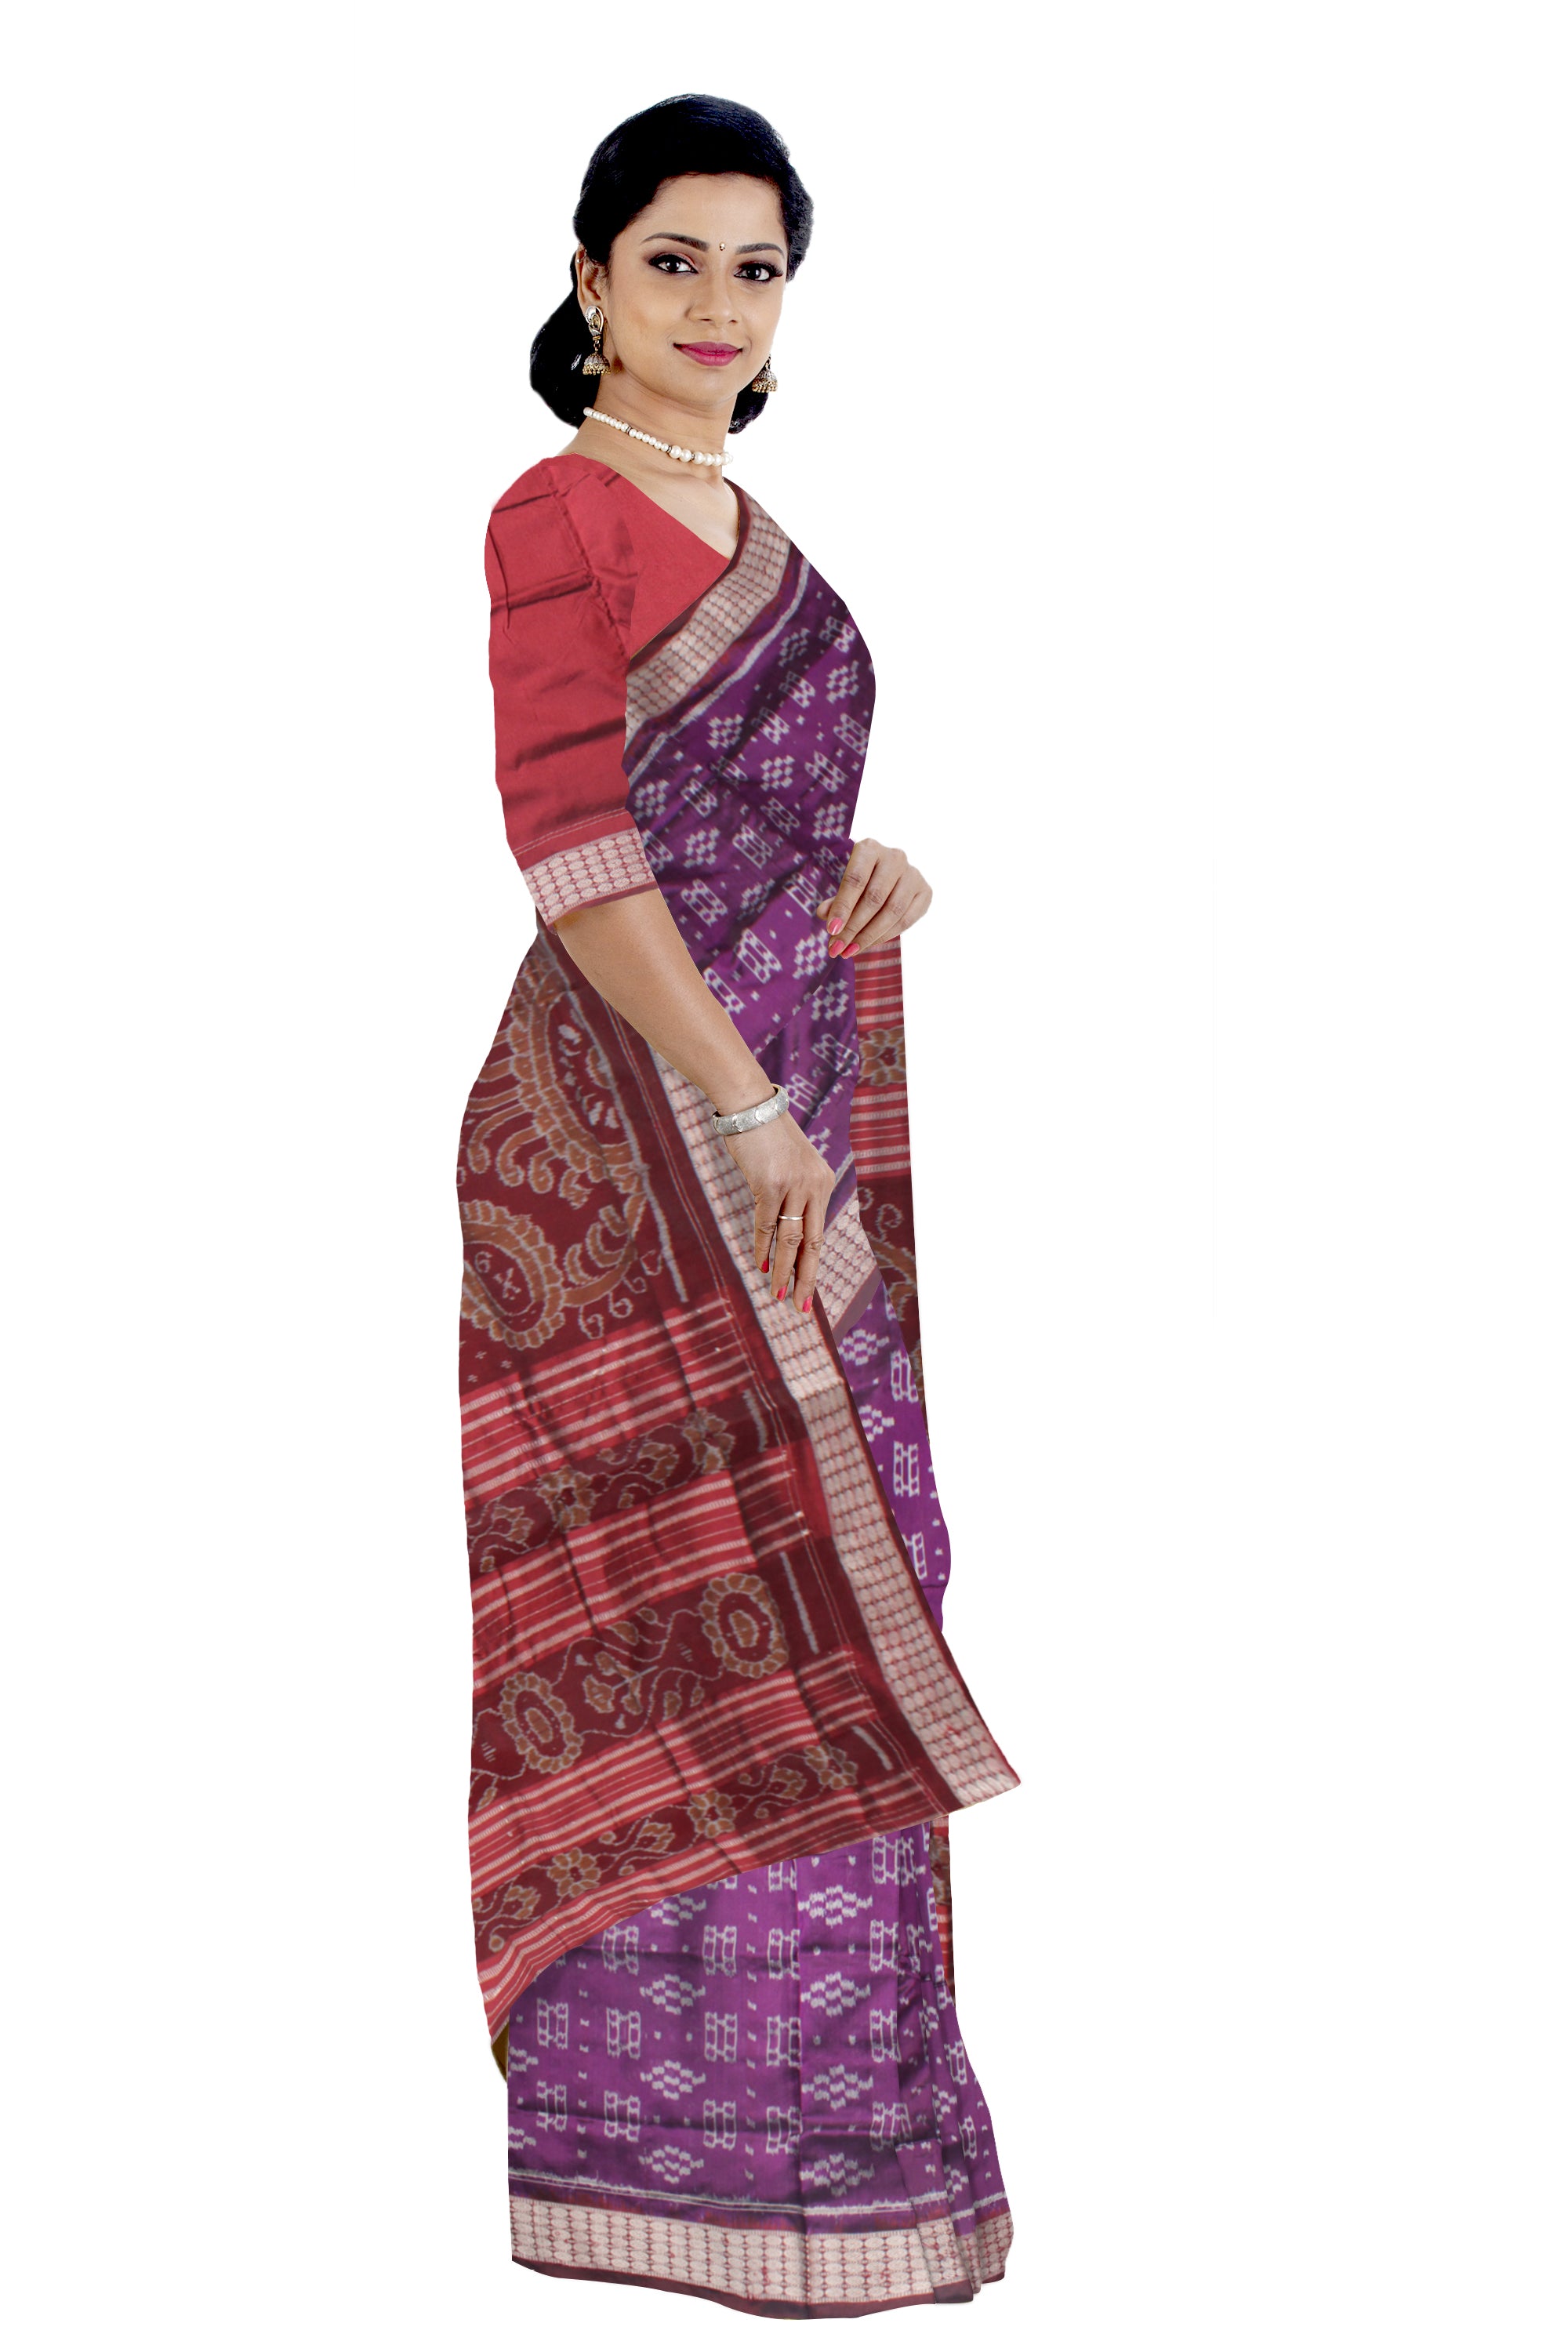 FULL BODY SMALL PASAPALI PATTERN PATA  SAREE IS VIOLET AND MAROON COLOR BASE,WITH MATCHING BLOUSE PIECE. - Koshali Arts & Crafts Enterprise